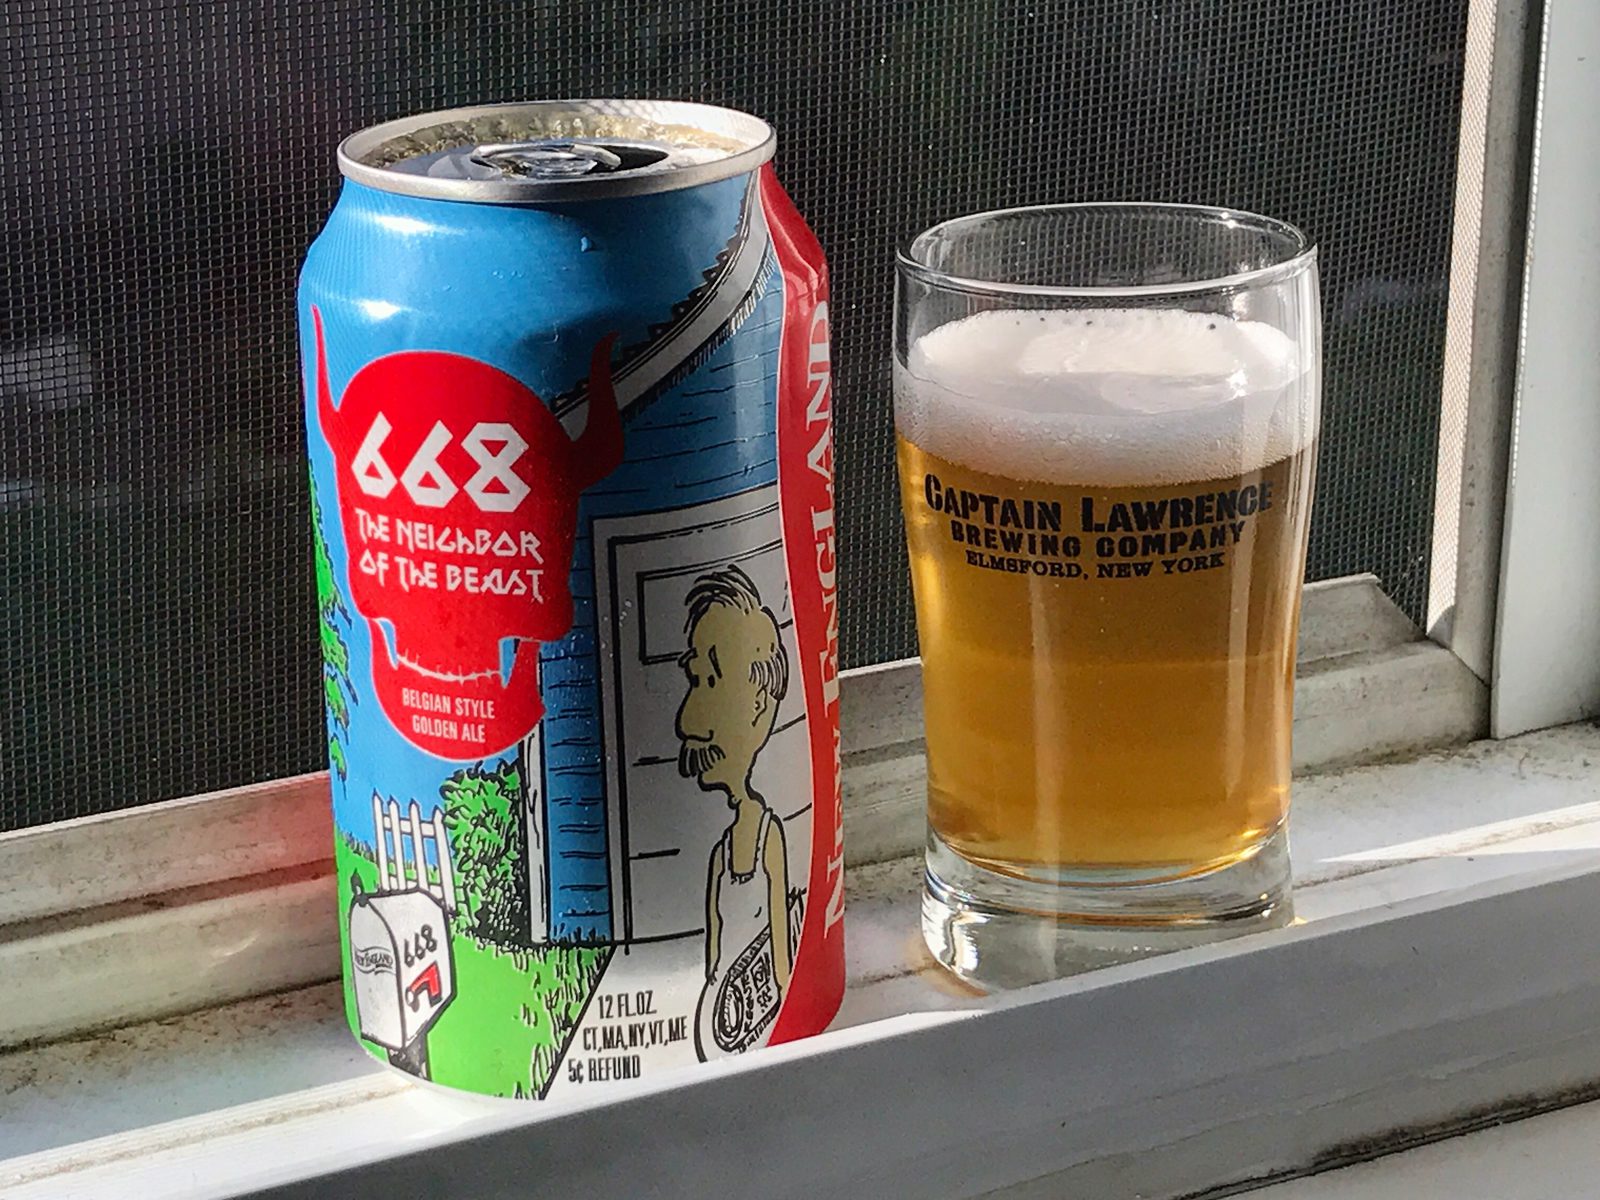 New England Brewing Company: 668 The Neighbor of the Beast